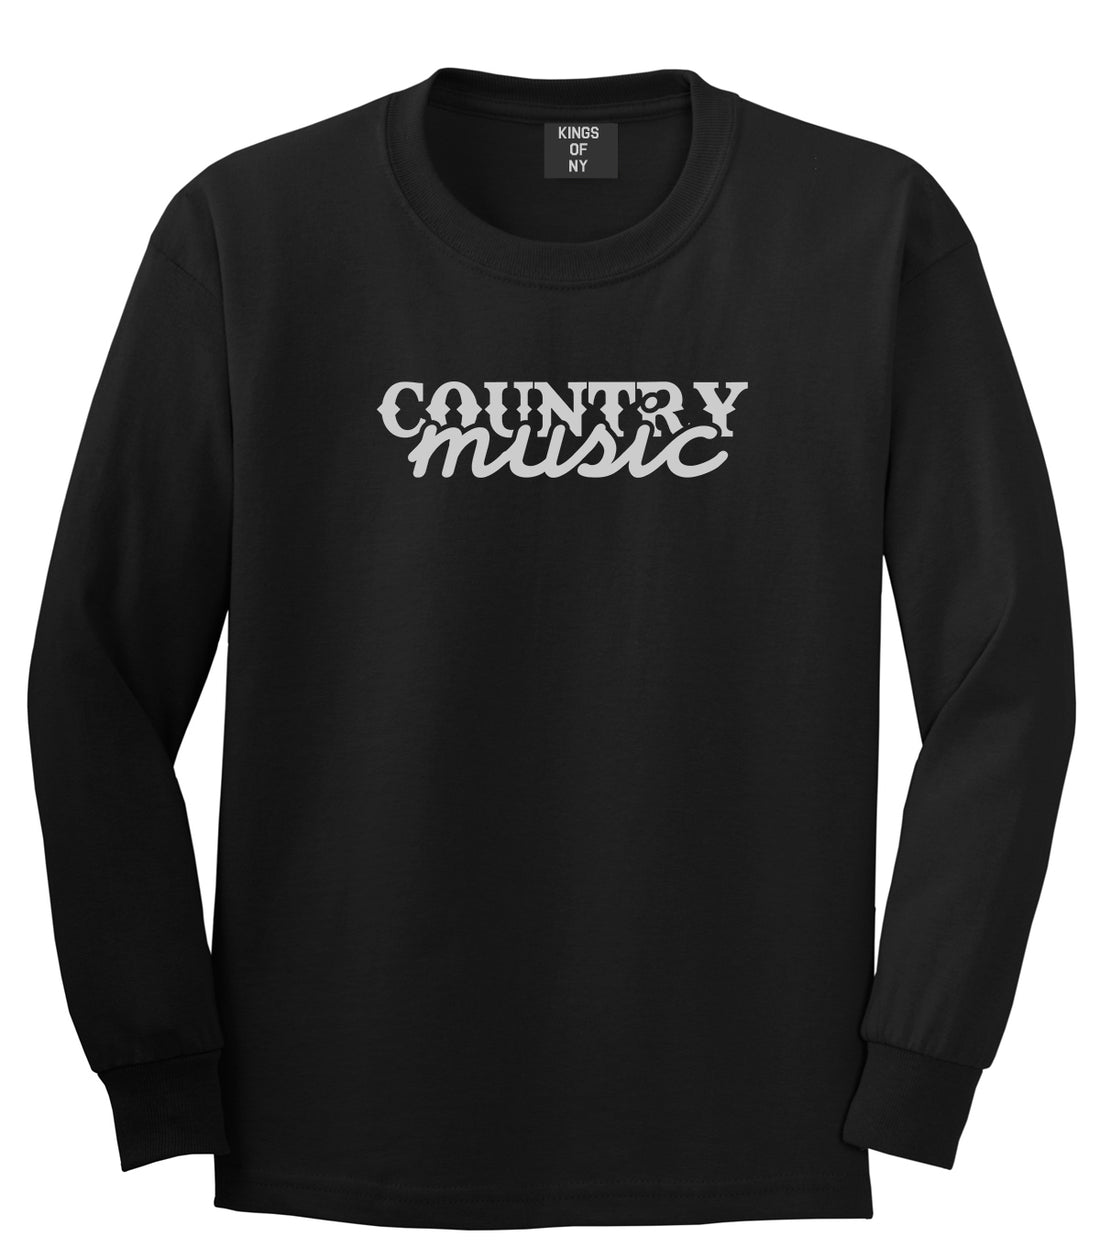 Country Music Black Long Sleeve T-Shirt by Kings Of NY